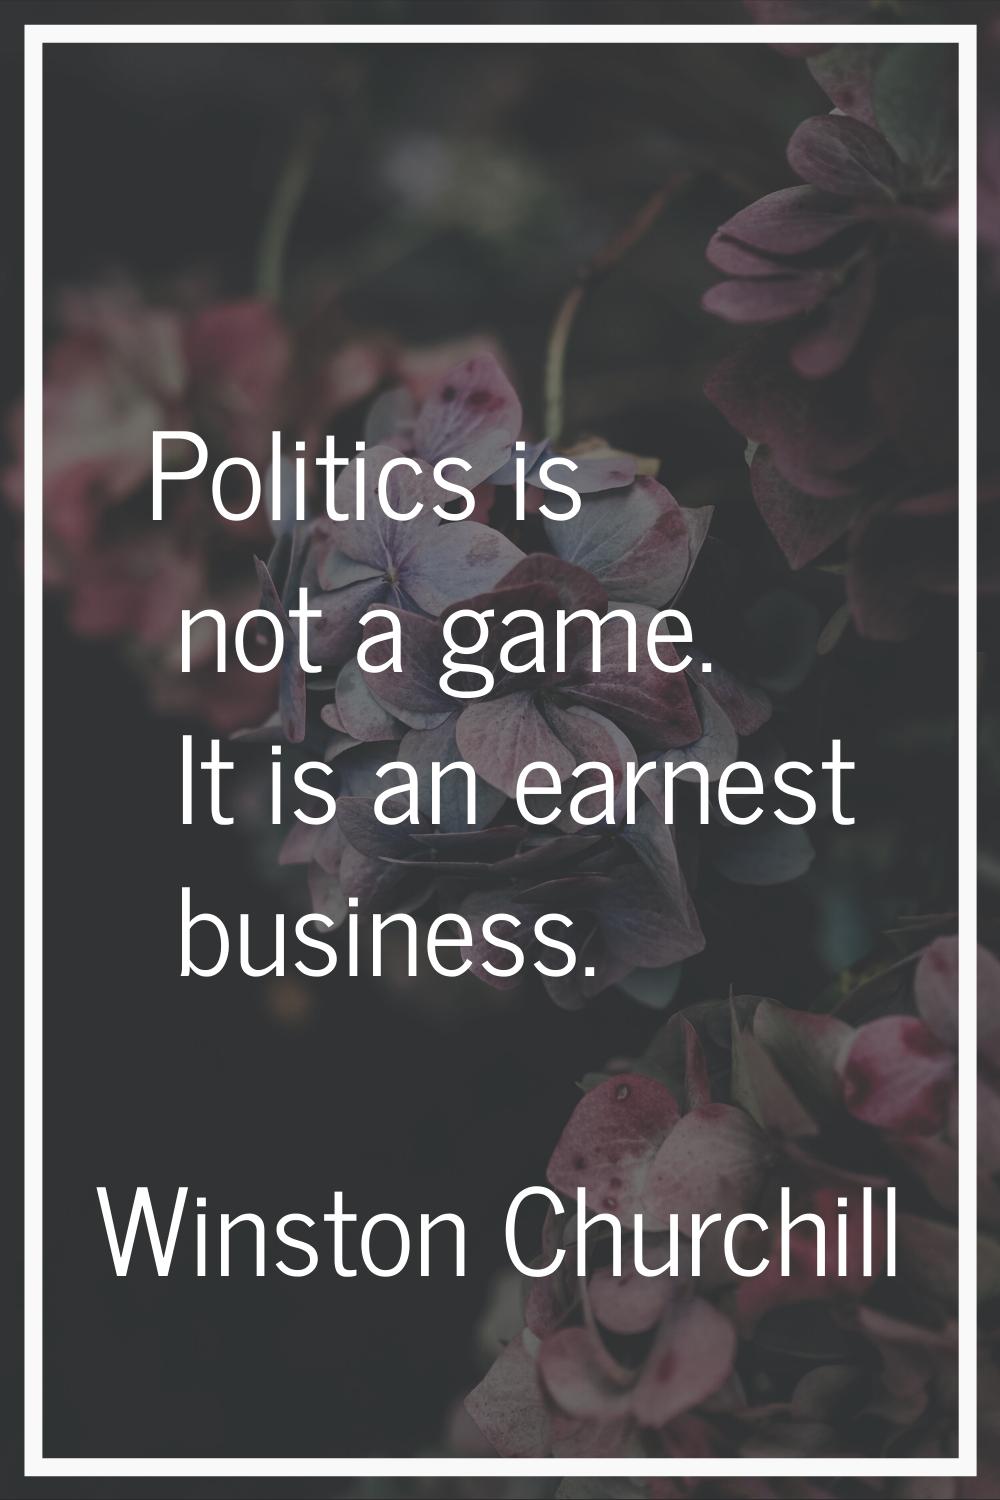 Politics is not a game. It is an earnest business.